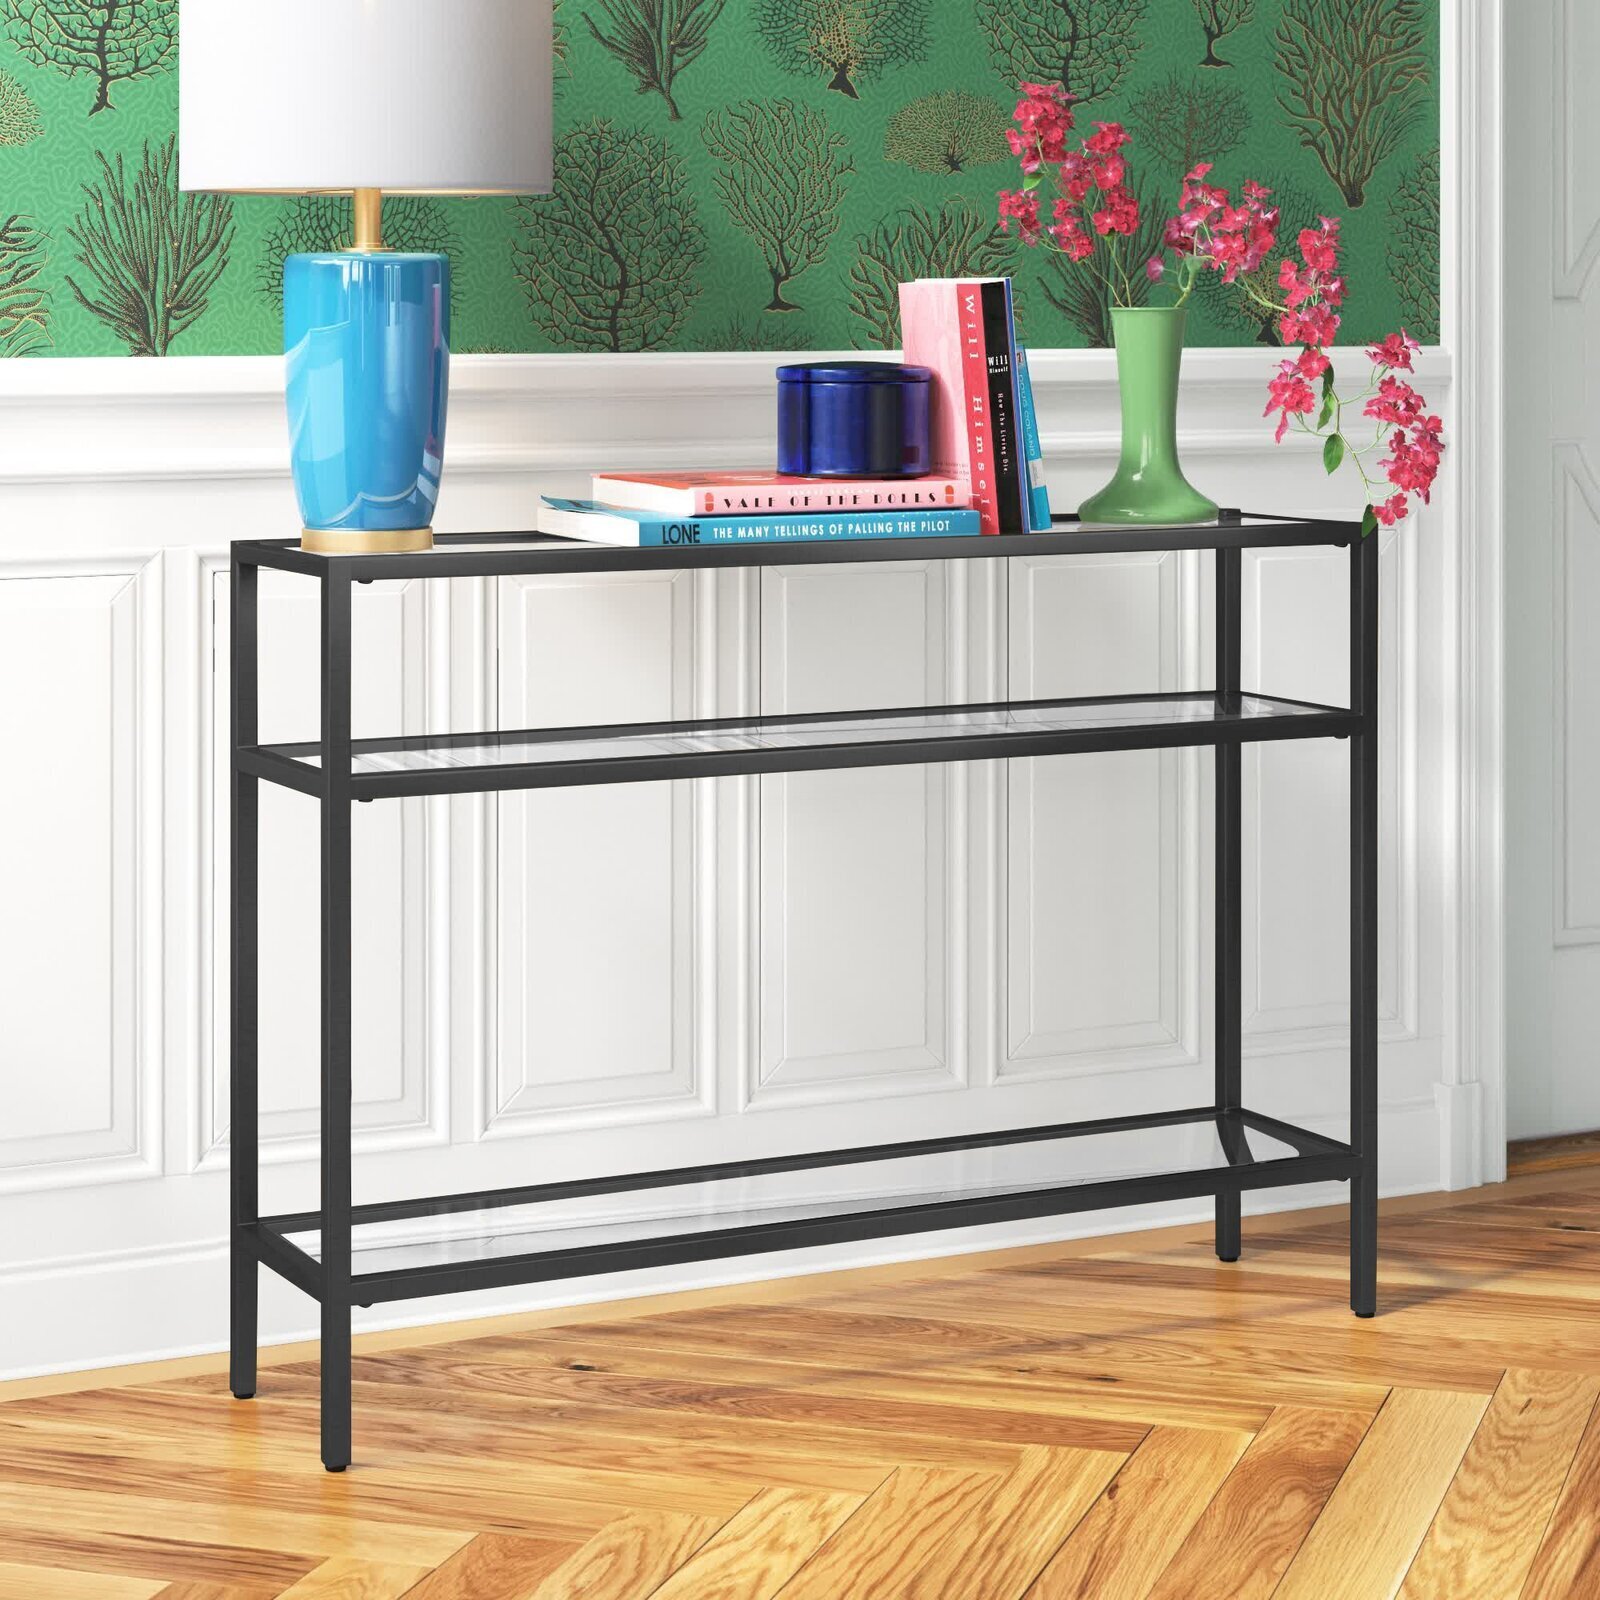 Thick Framed Metal Table With Shelves